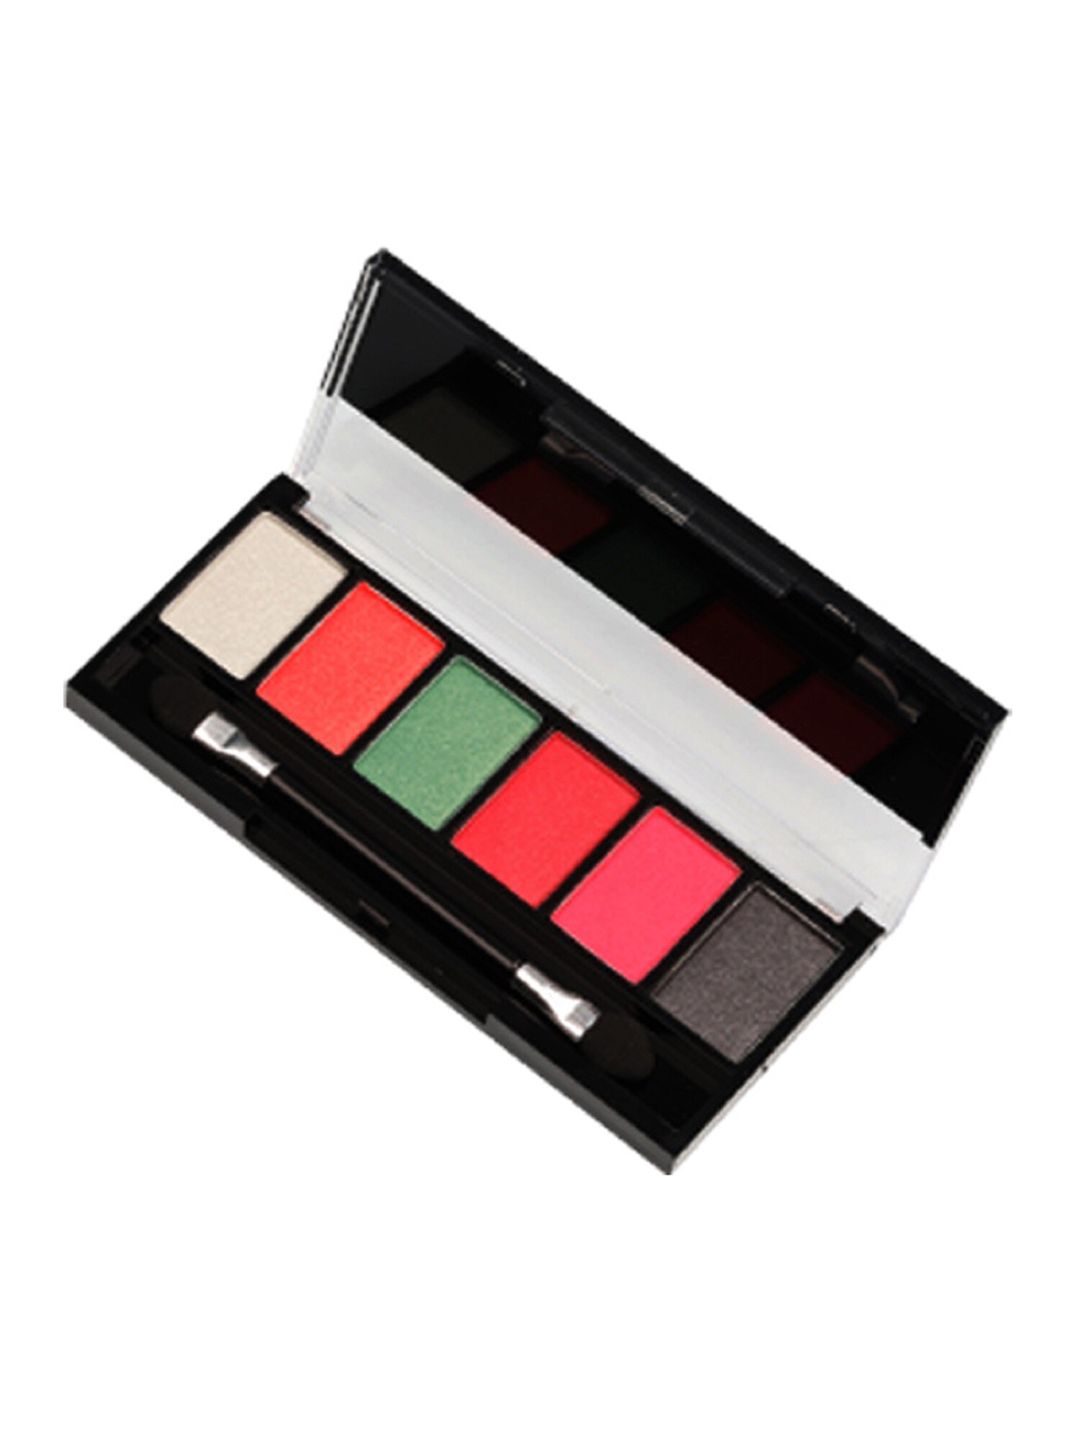 Fashion Colour 6 Colours Eyeshadow Palette 12 g - Romantic 06 Price in India